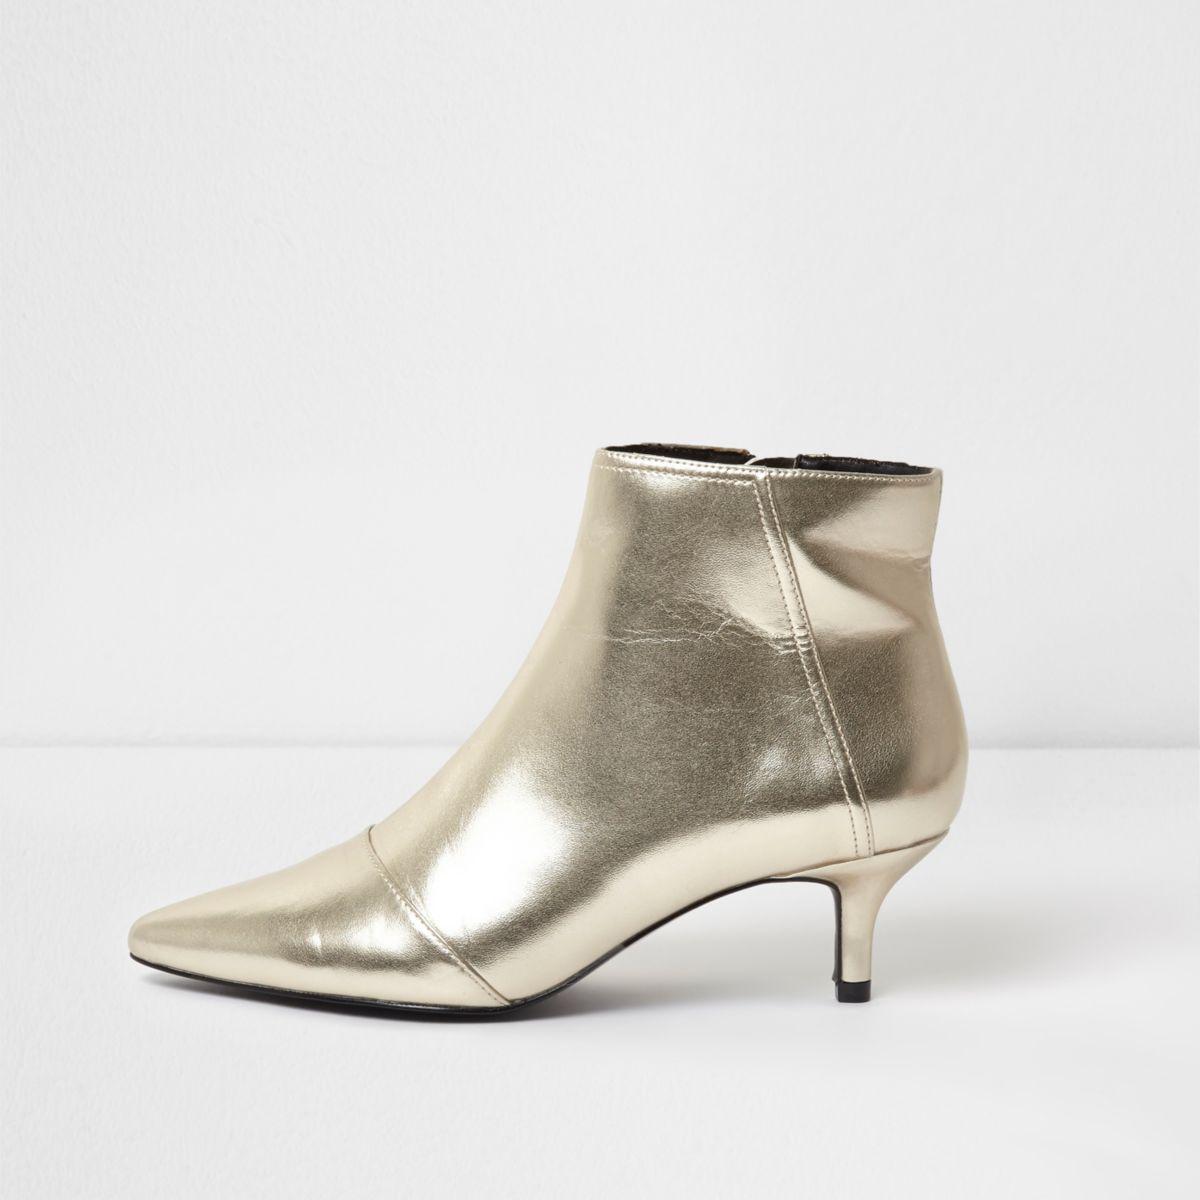 Lyst - River Island Gold Metallic Pointed Kitten Heel Ankle Boots Gold ...